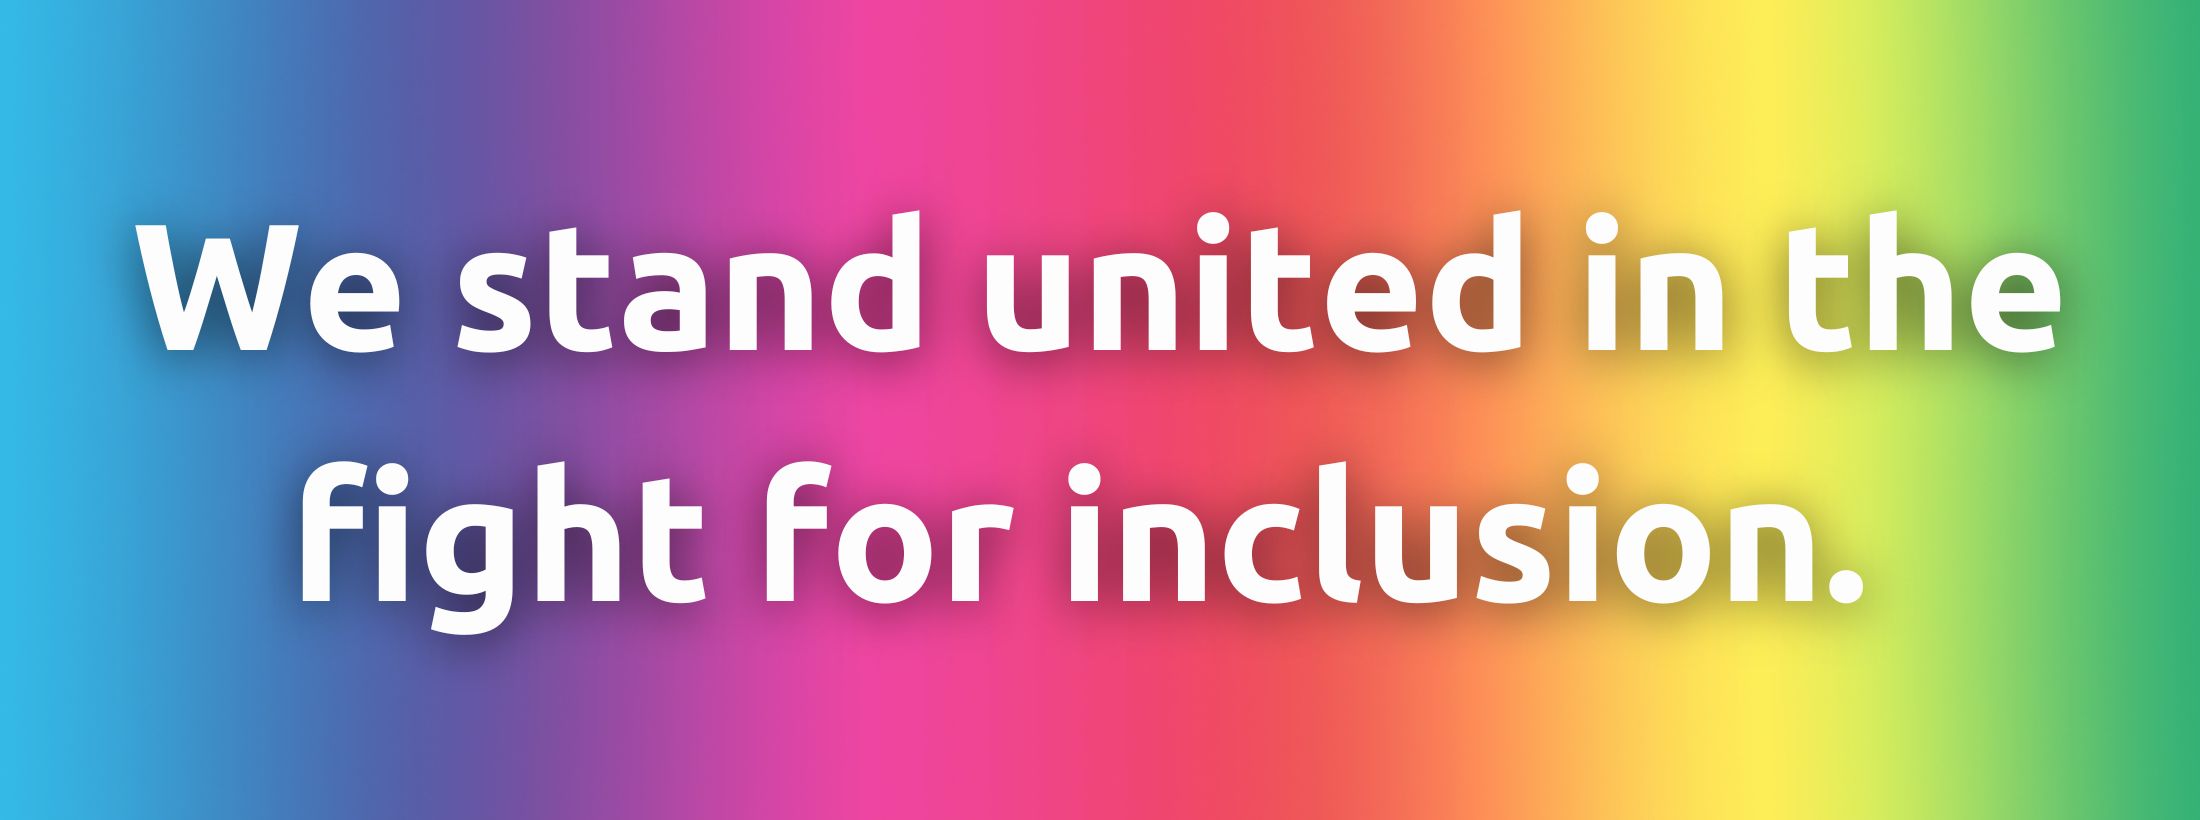 We stand for inclusion